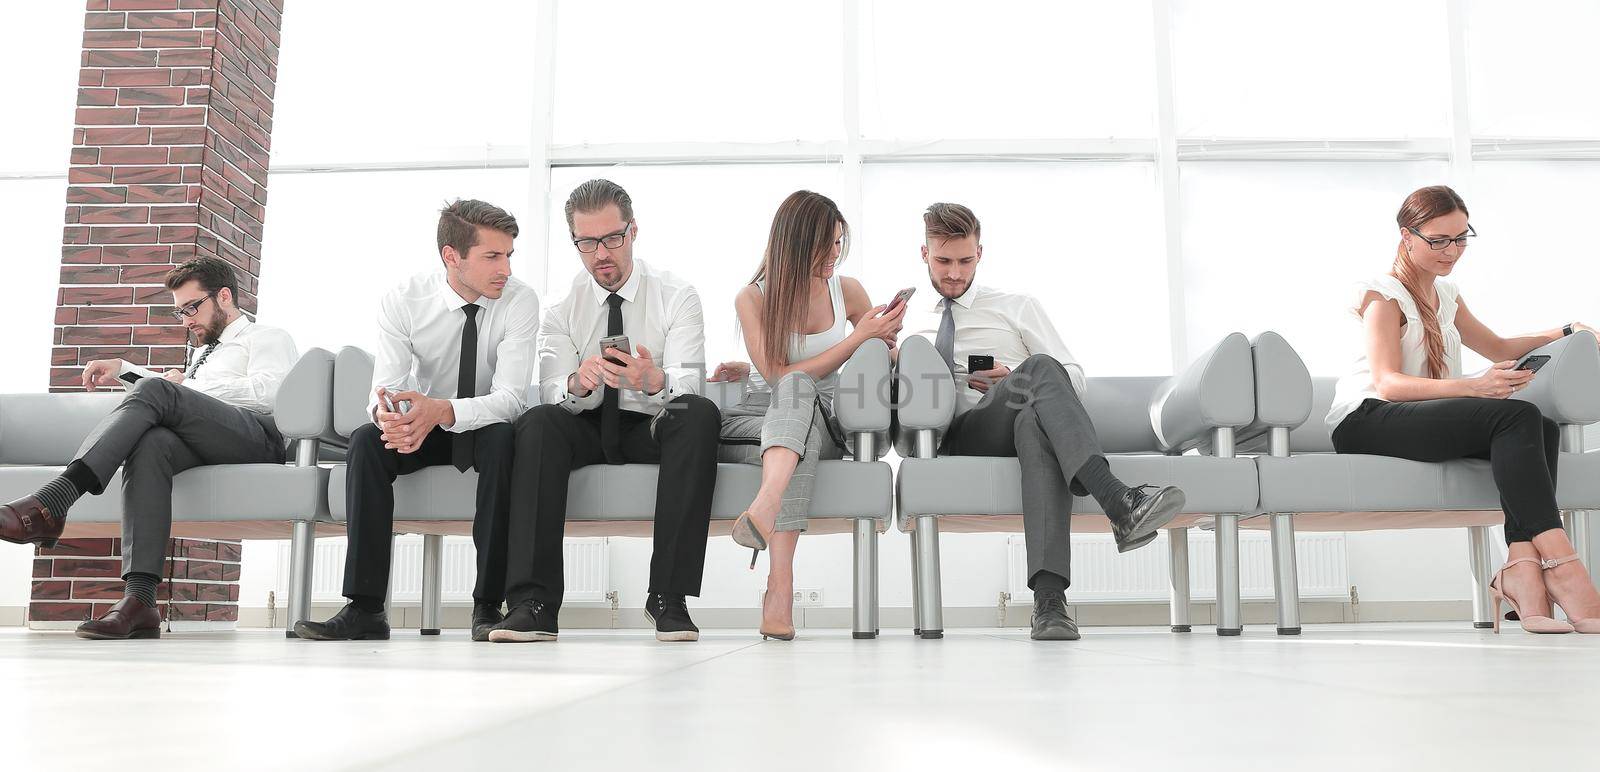 business team with mobile phones sitting in the lobby of the office by asdf